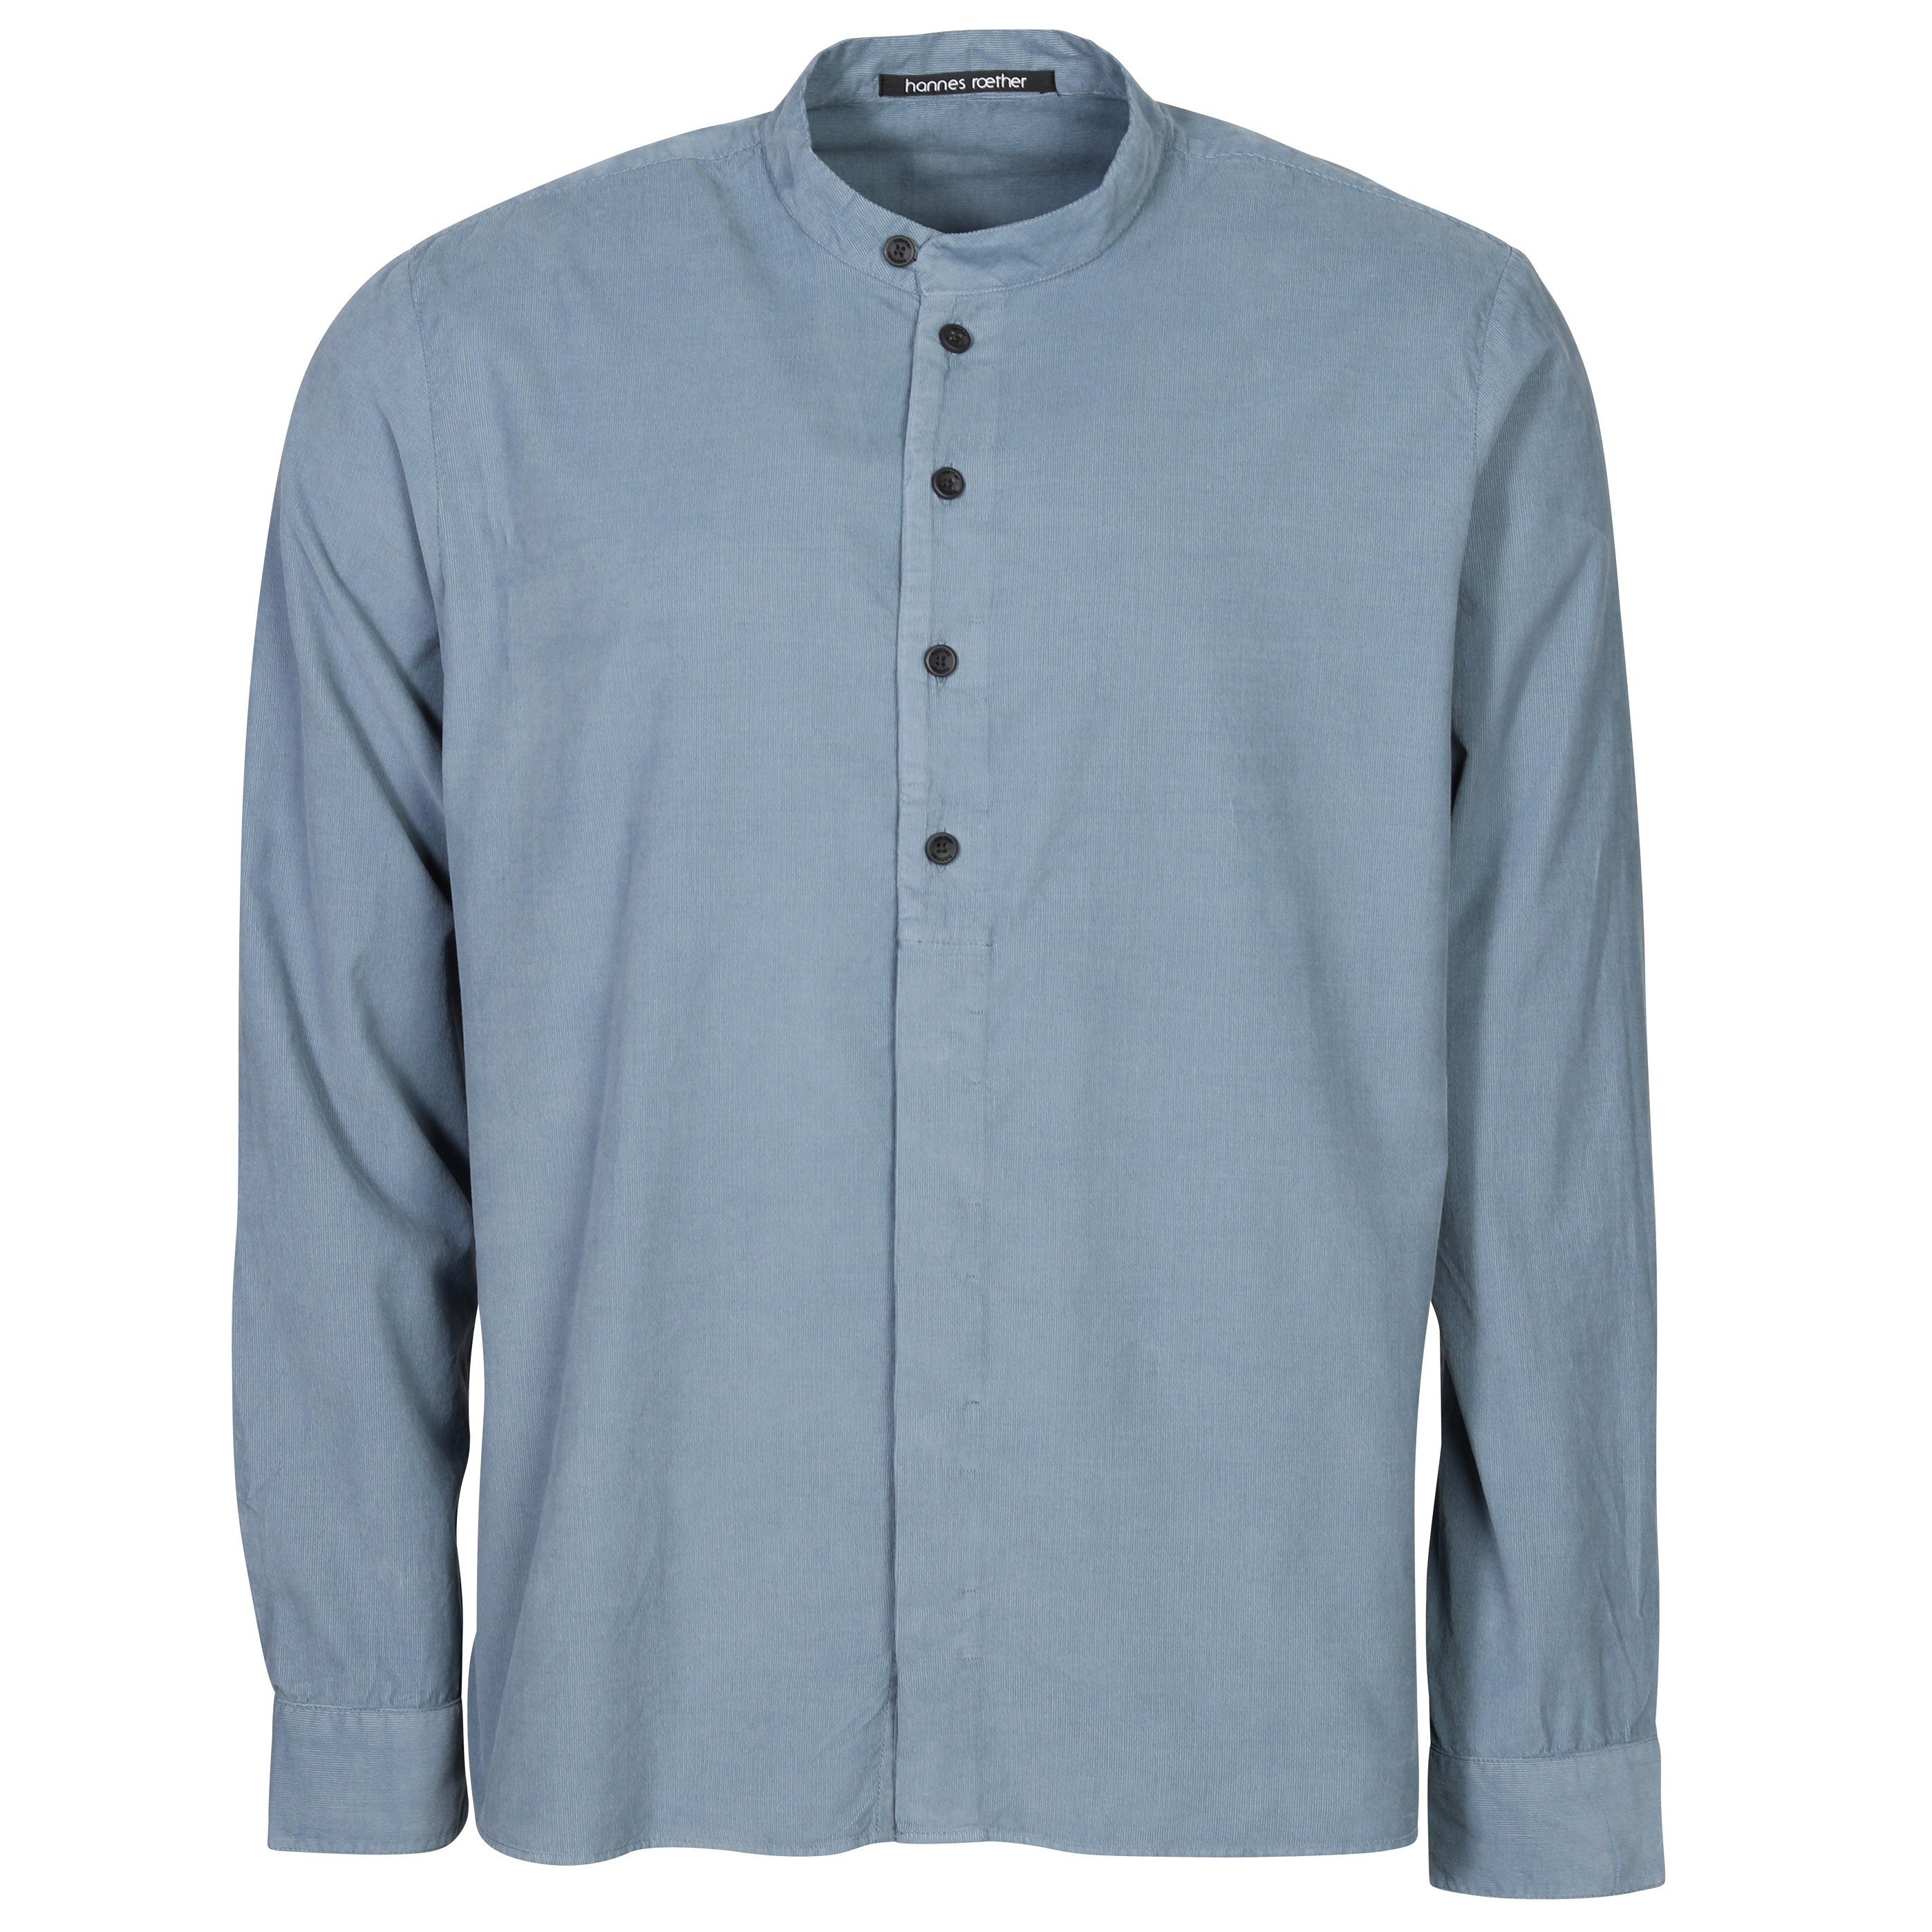 Hannes Roether Corduroy Shirt in Mirage